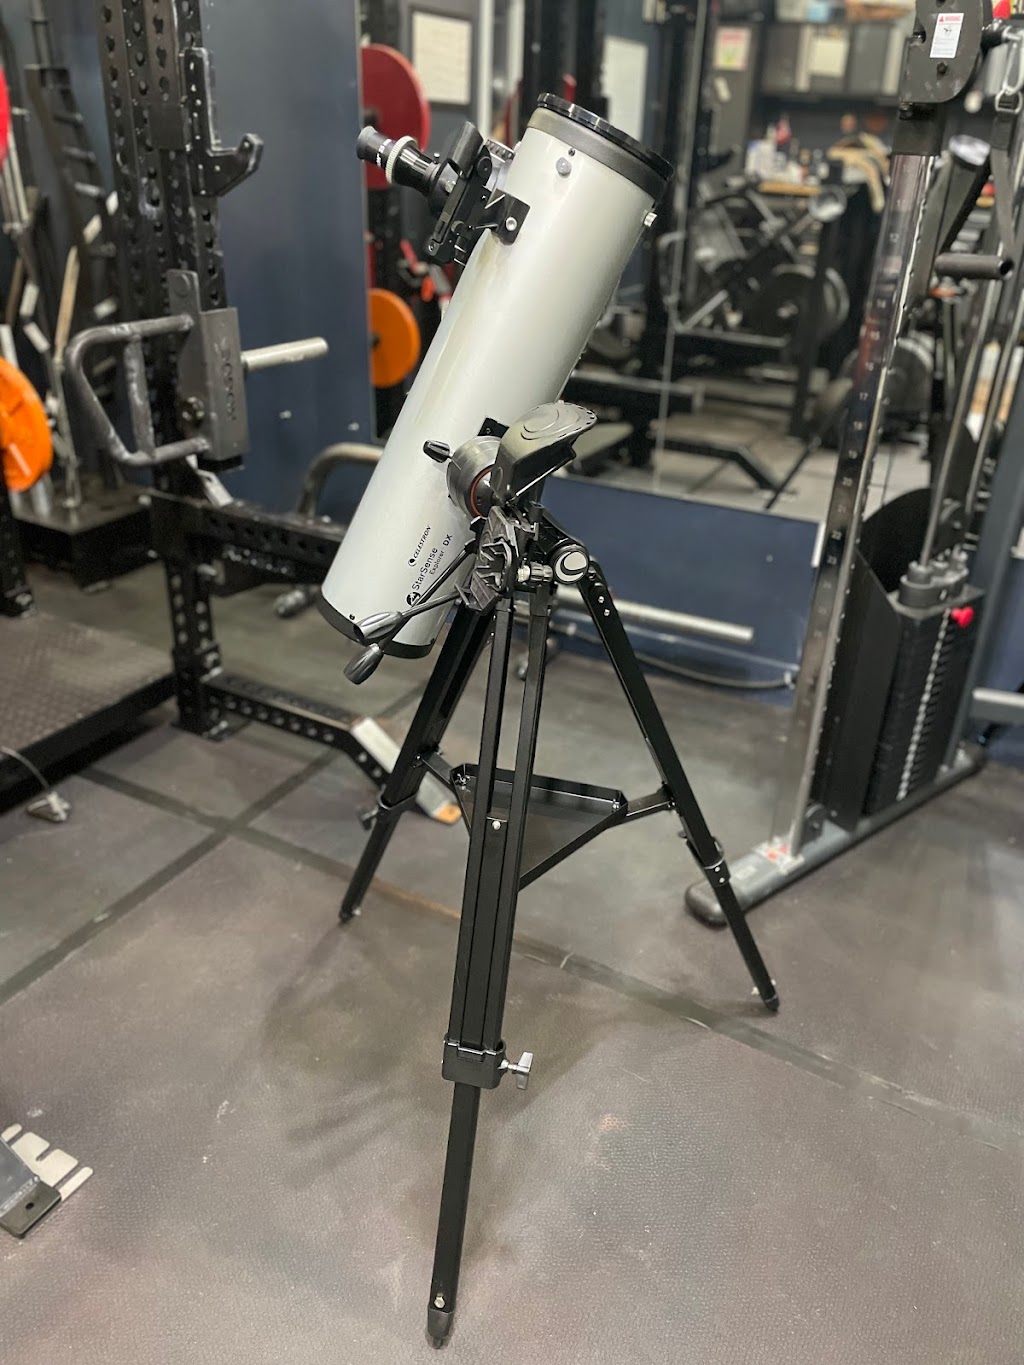 Telescopes Canada | 1 Rosetta Street, Unit 5 Pick-Up Address Only - No Storefront, Georgetown, ON L7G 3P1, Canada | Phone: (289) 428-1334